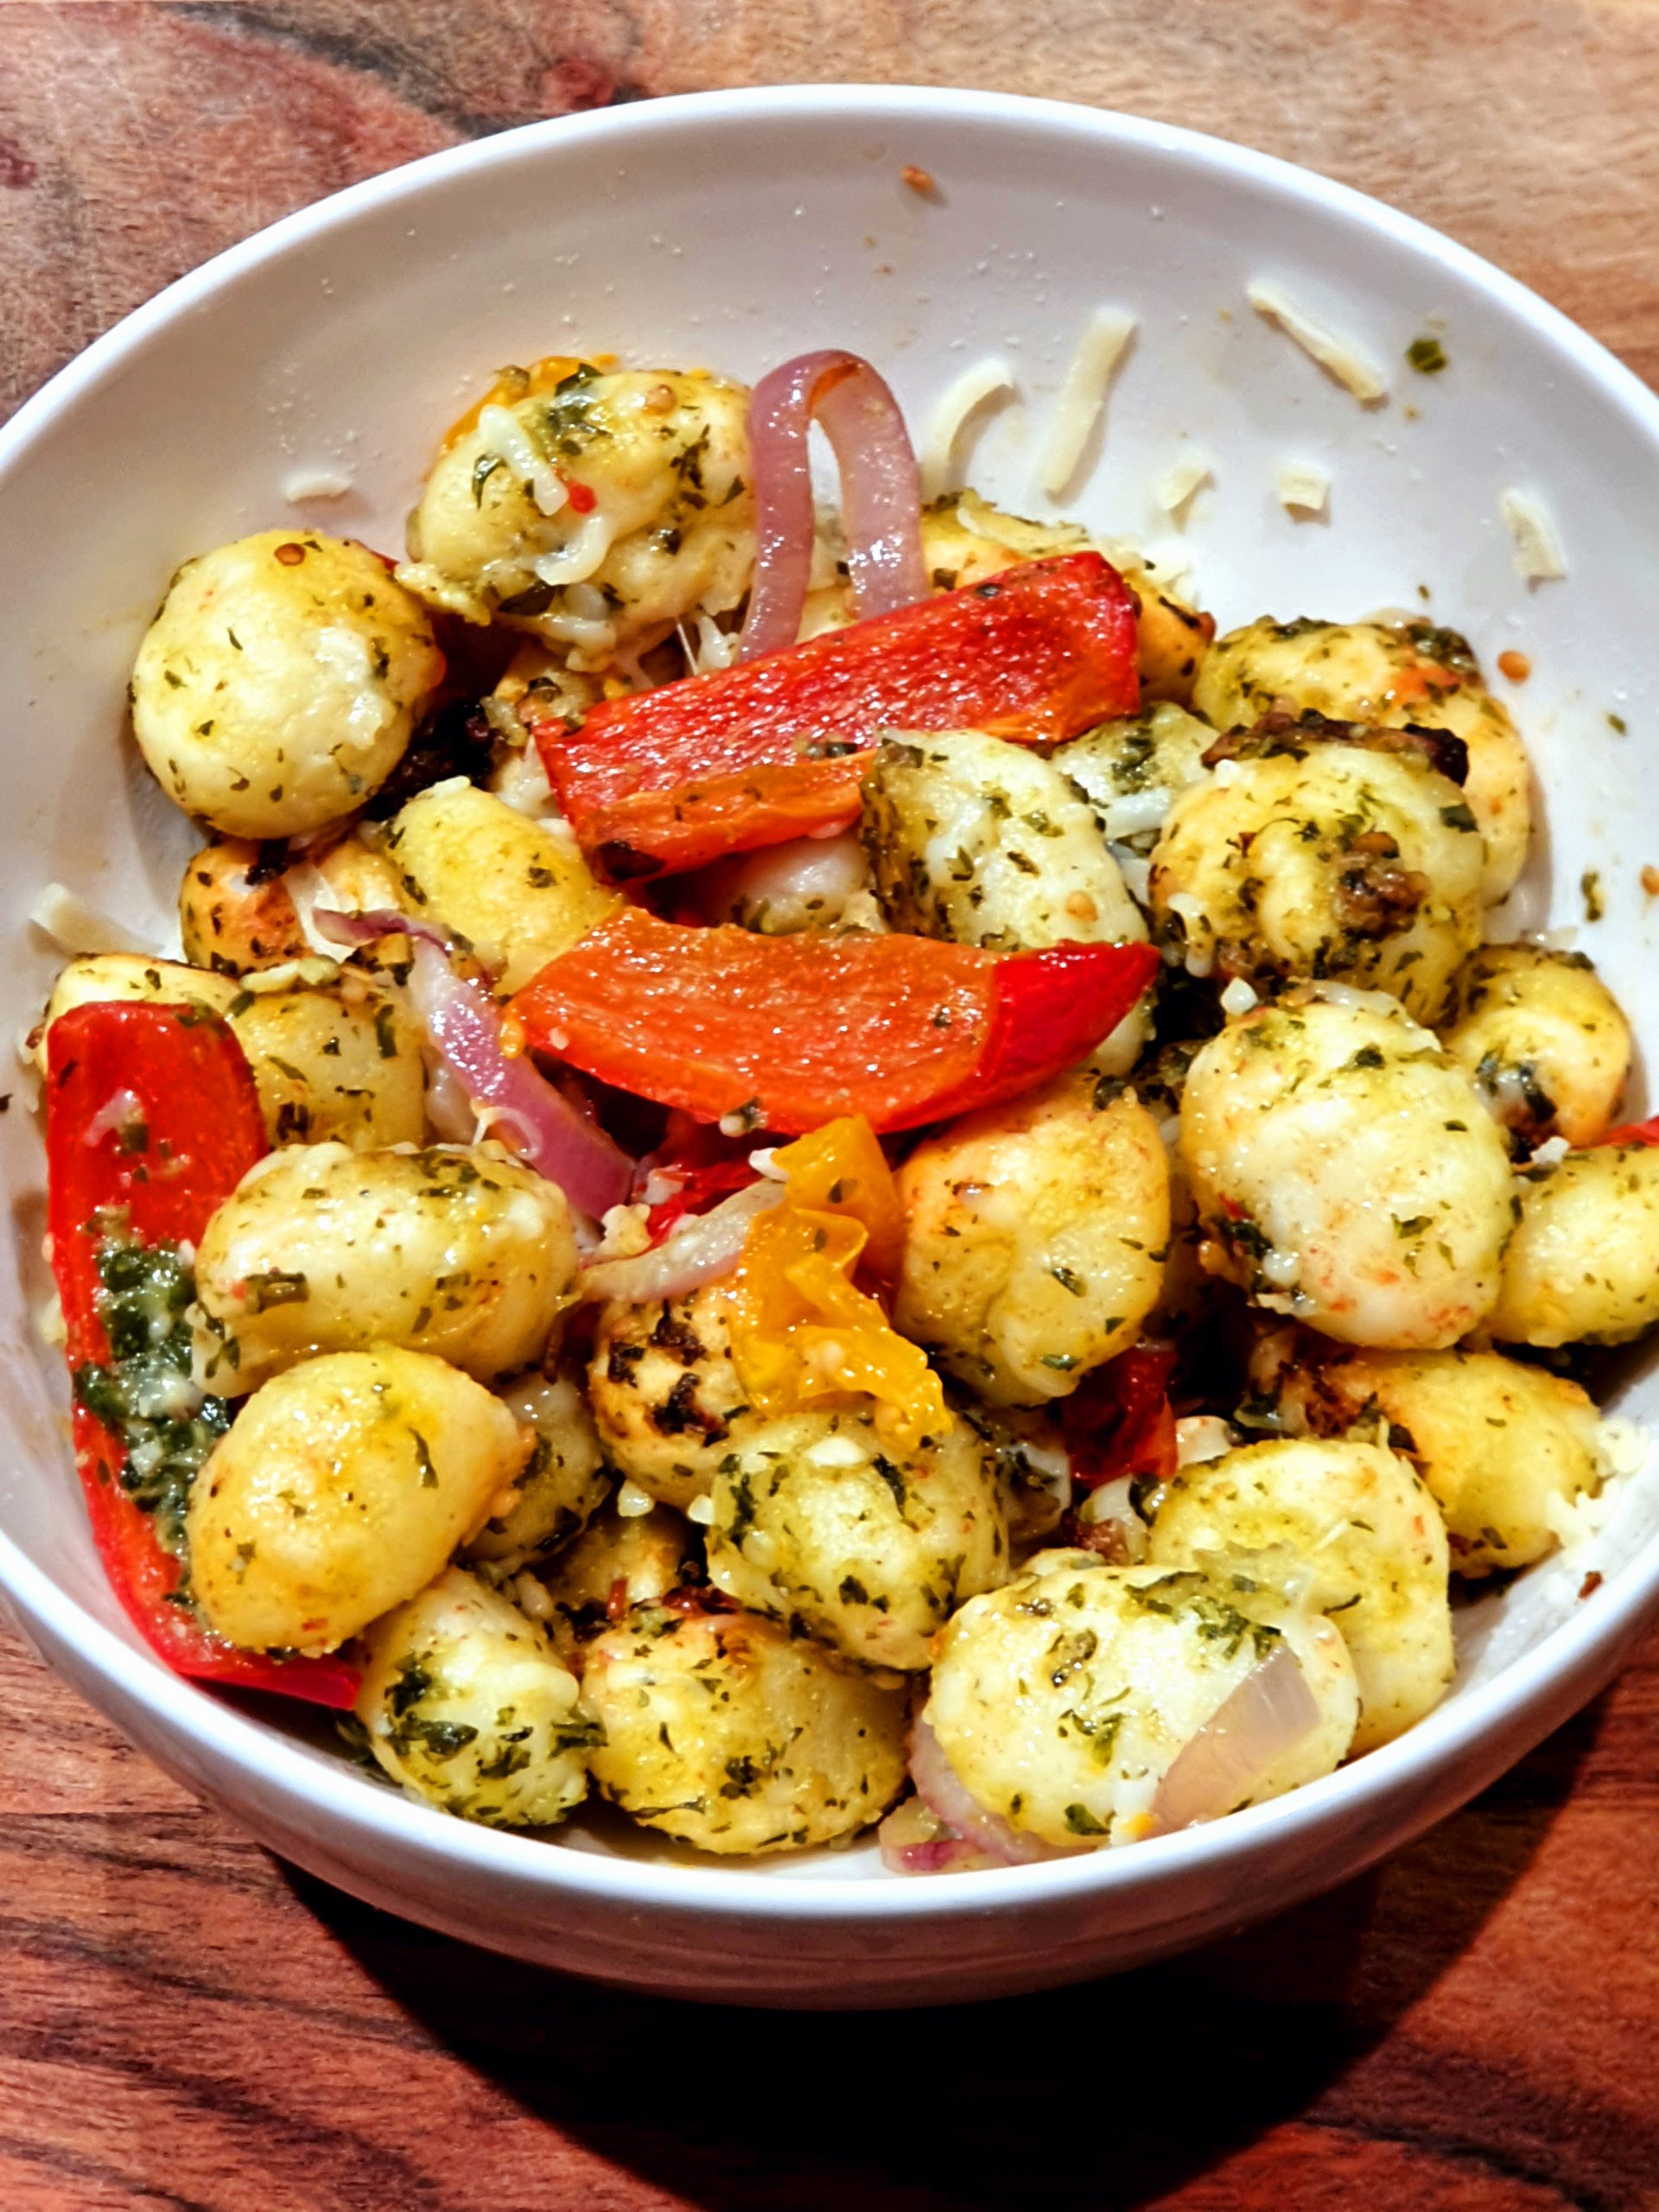 Oven Baked Gnocchi with Vegetables